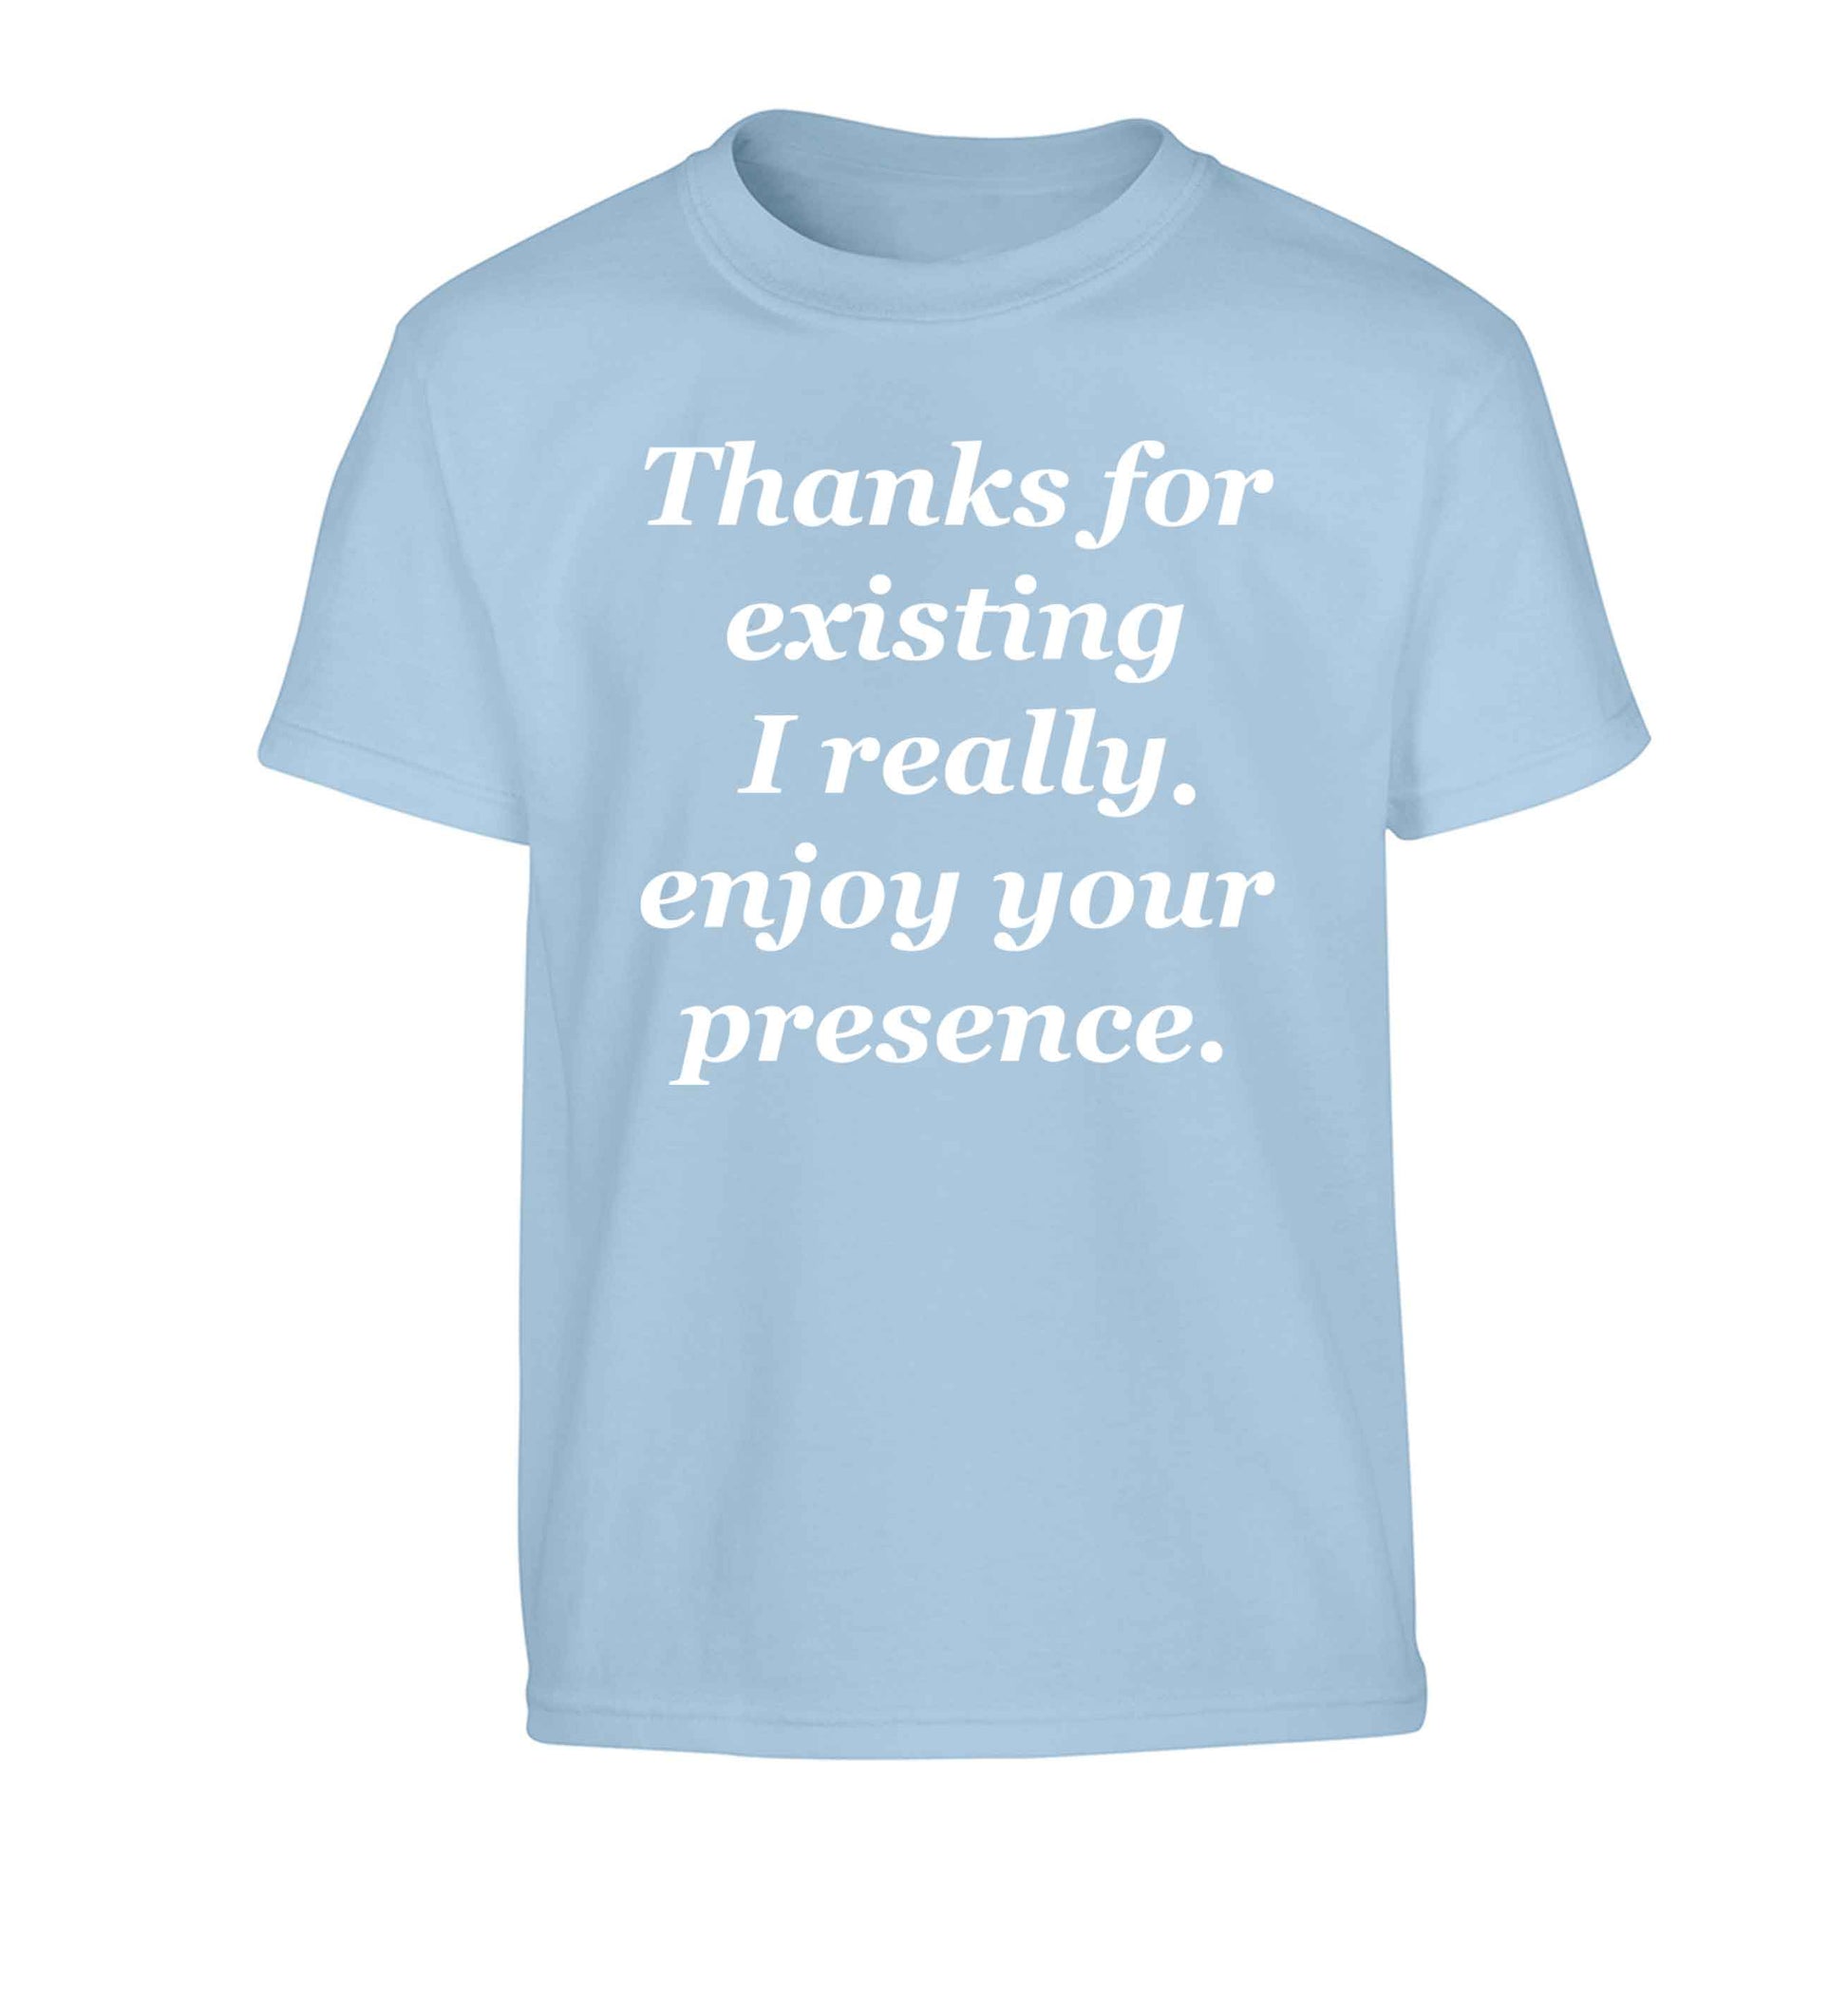 Thanks for existing I really enjoy your presence Children's light blue Tshirt 12-13 Years